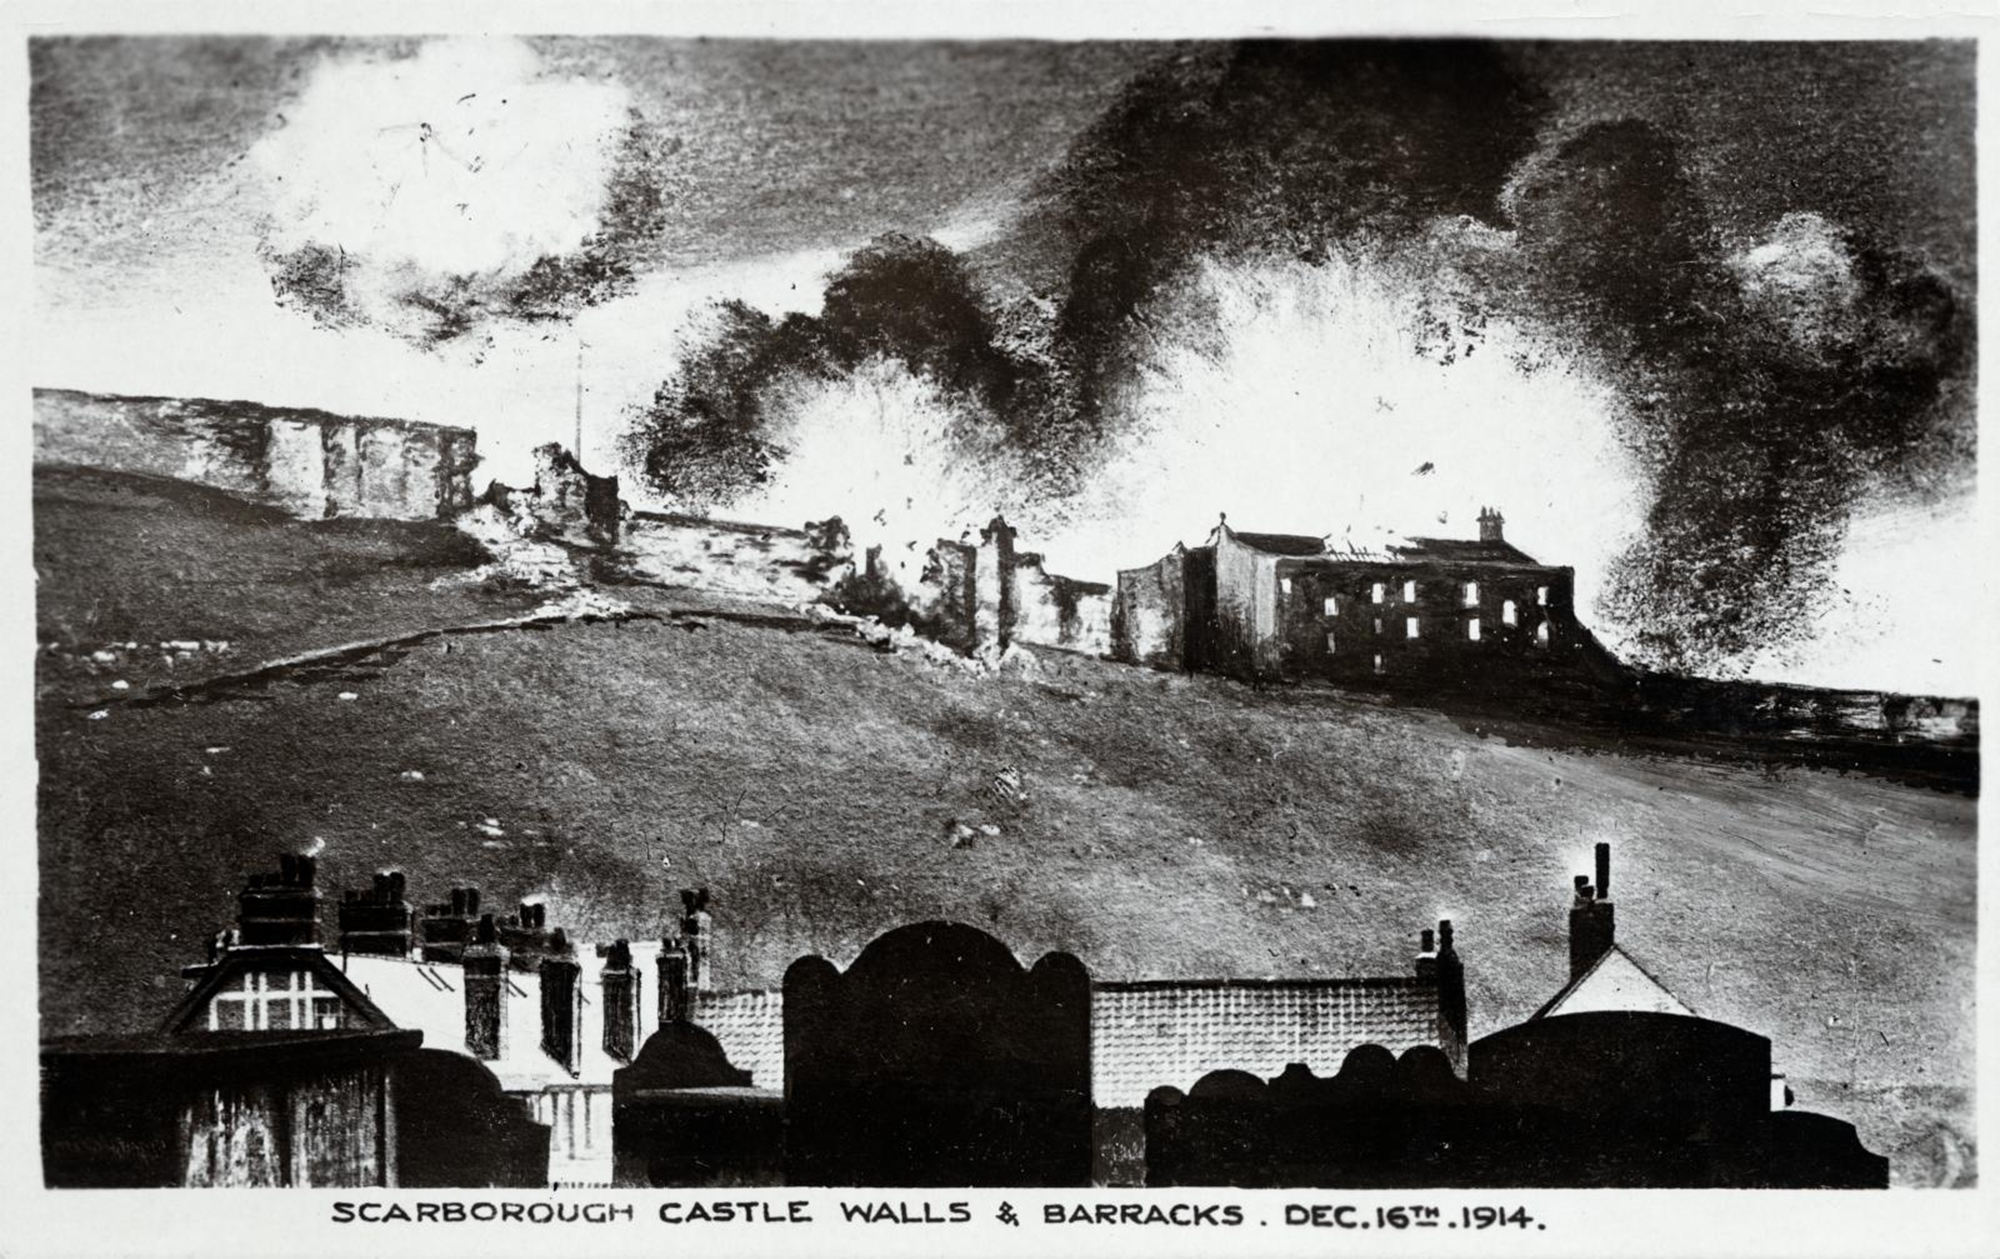 Scarborough Castle, North Yorkshire, a reconstruction of the bombardment shows shells hitting the castle curtain wall and the old barrack block. No photographs are known to survive of the bombardment as it took place but reconstructions like this designed for a postcard convey the drama of the event.